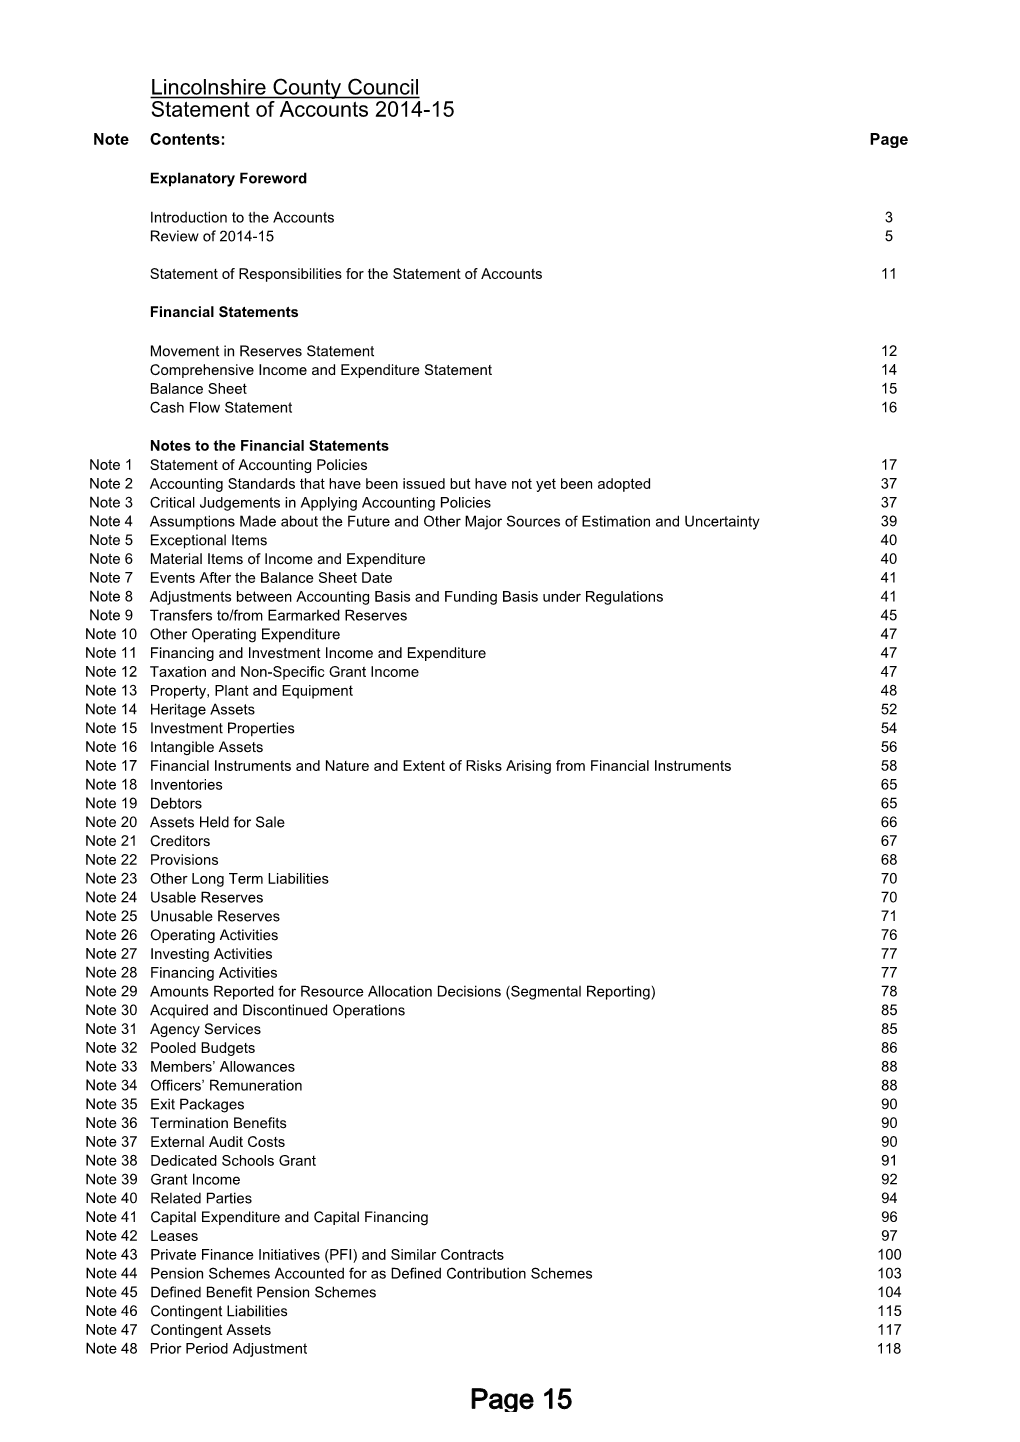 Lincolnshire County Council Statement of Accounts 2014-15 Note Contents: Page